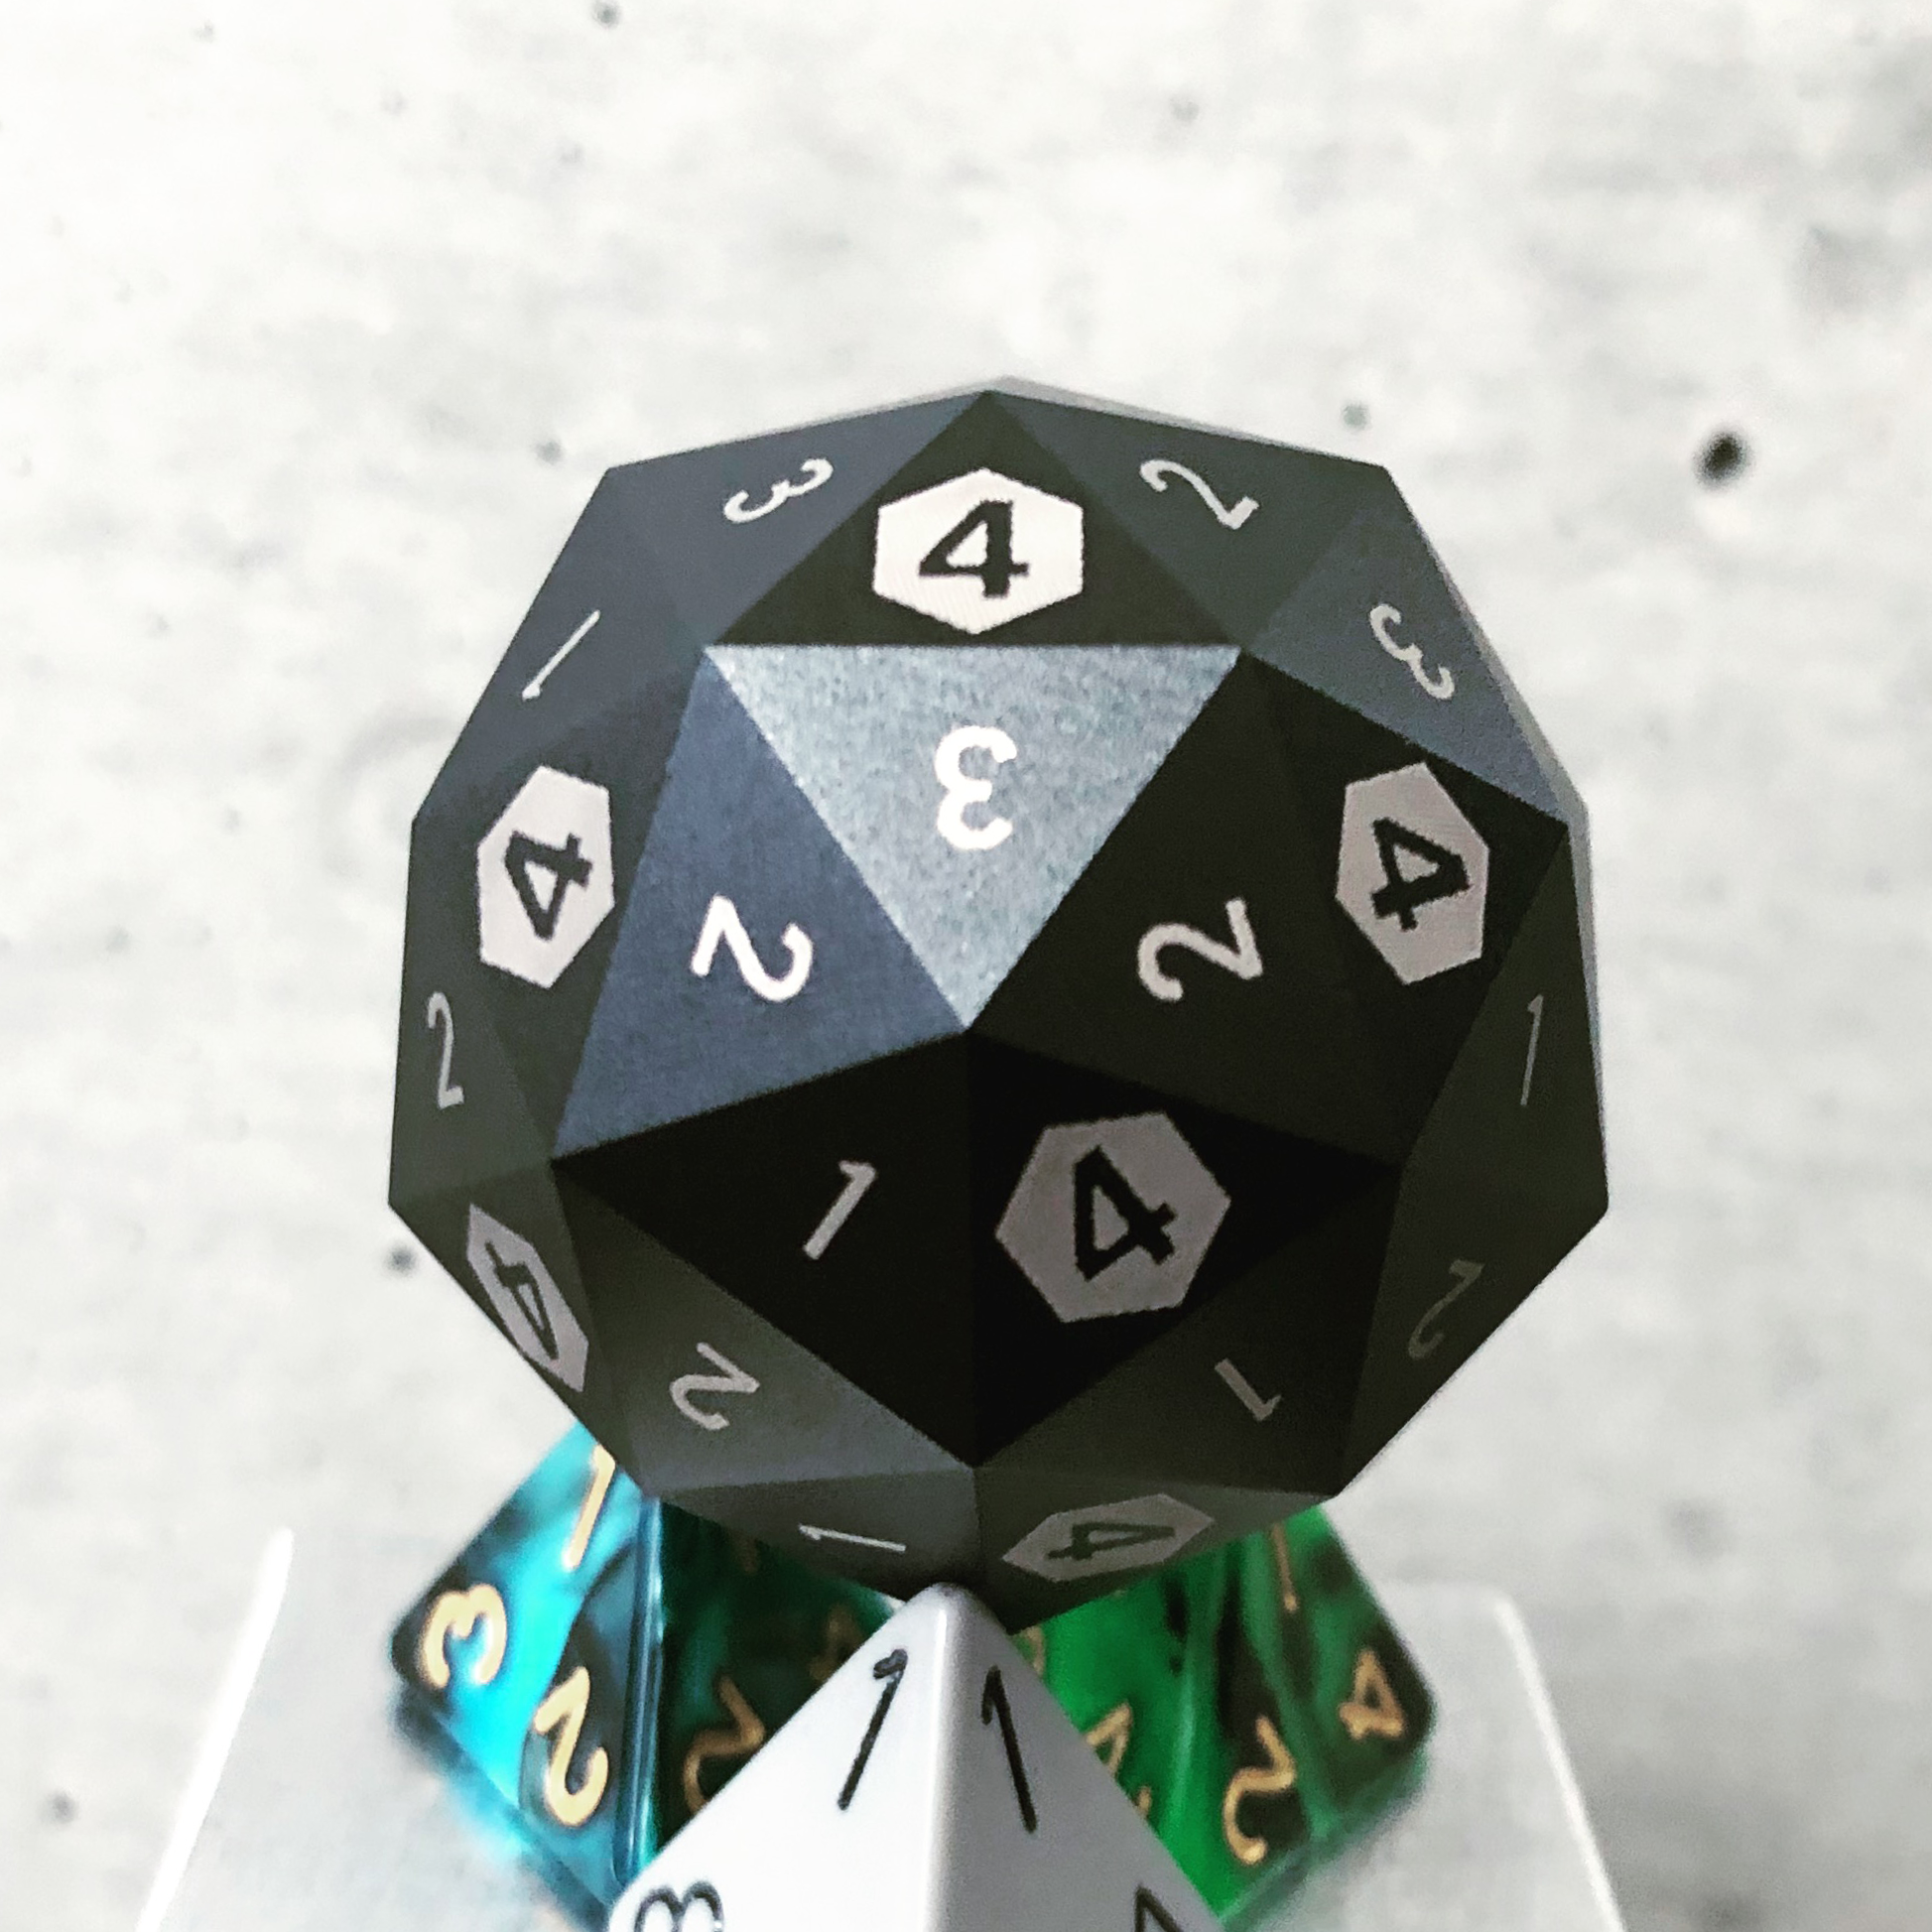 60-sided d4